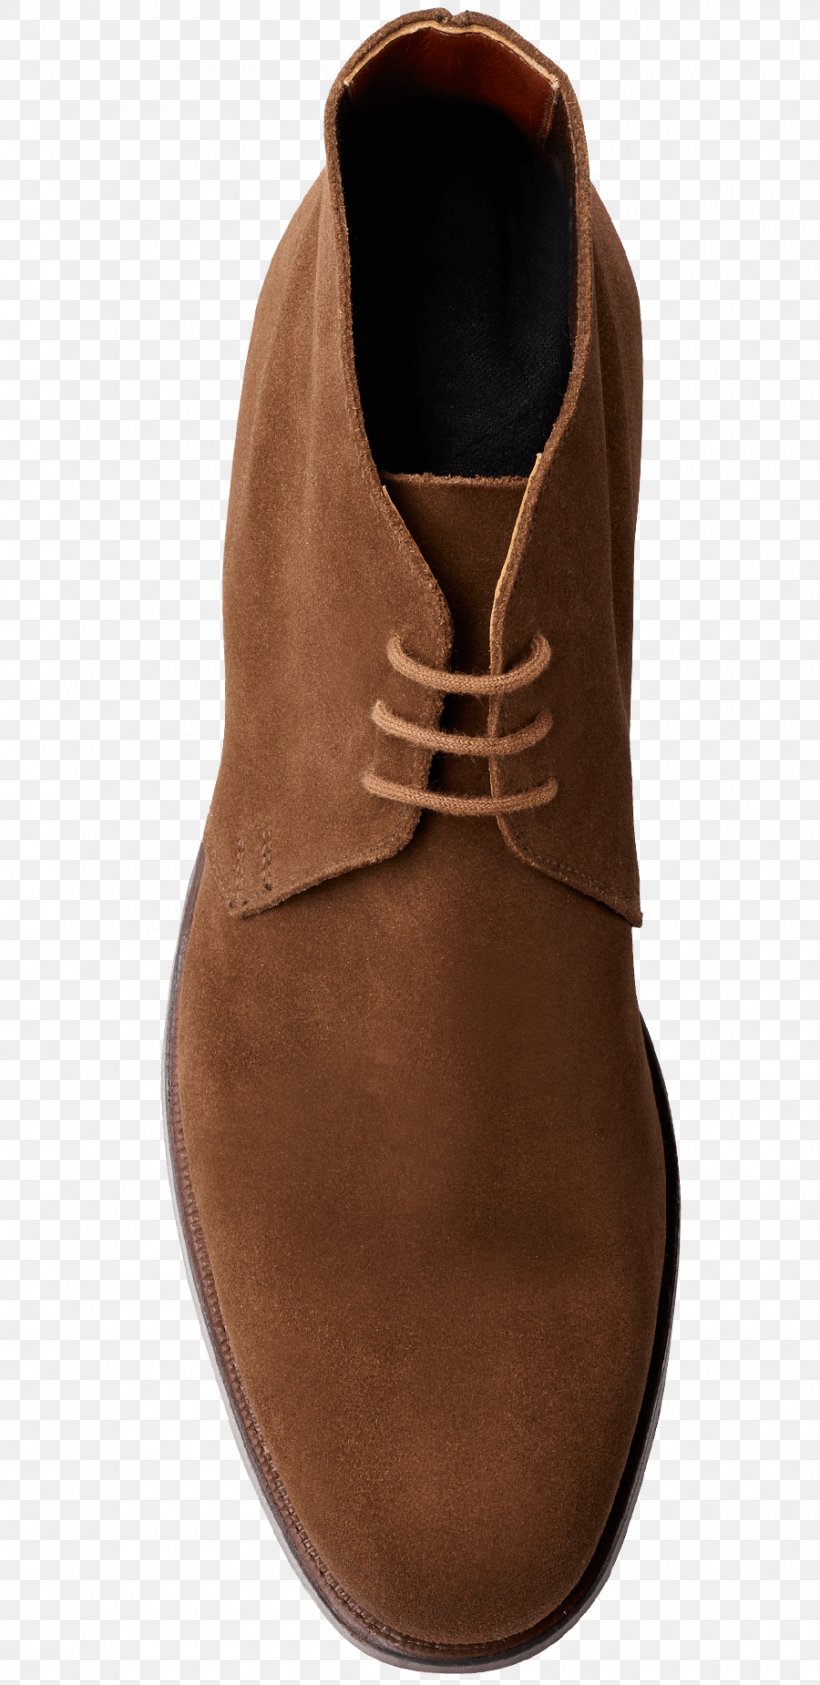 Suede Chukka Boot Shoe Leather, PNG, 900x1850px, Suede, Ankle, Boot, Brown, Caramel Color Download Free